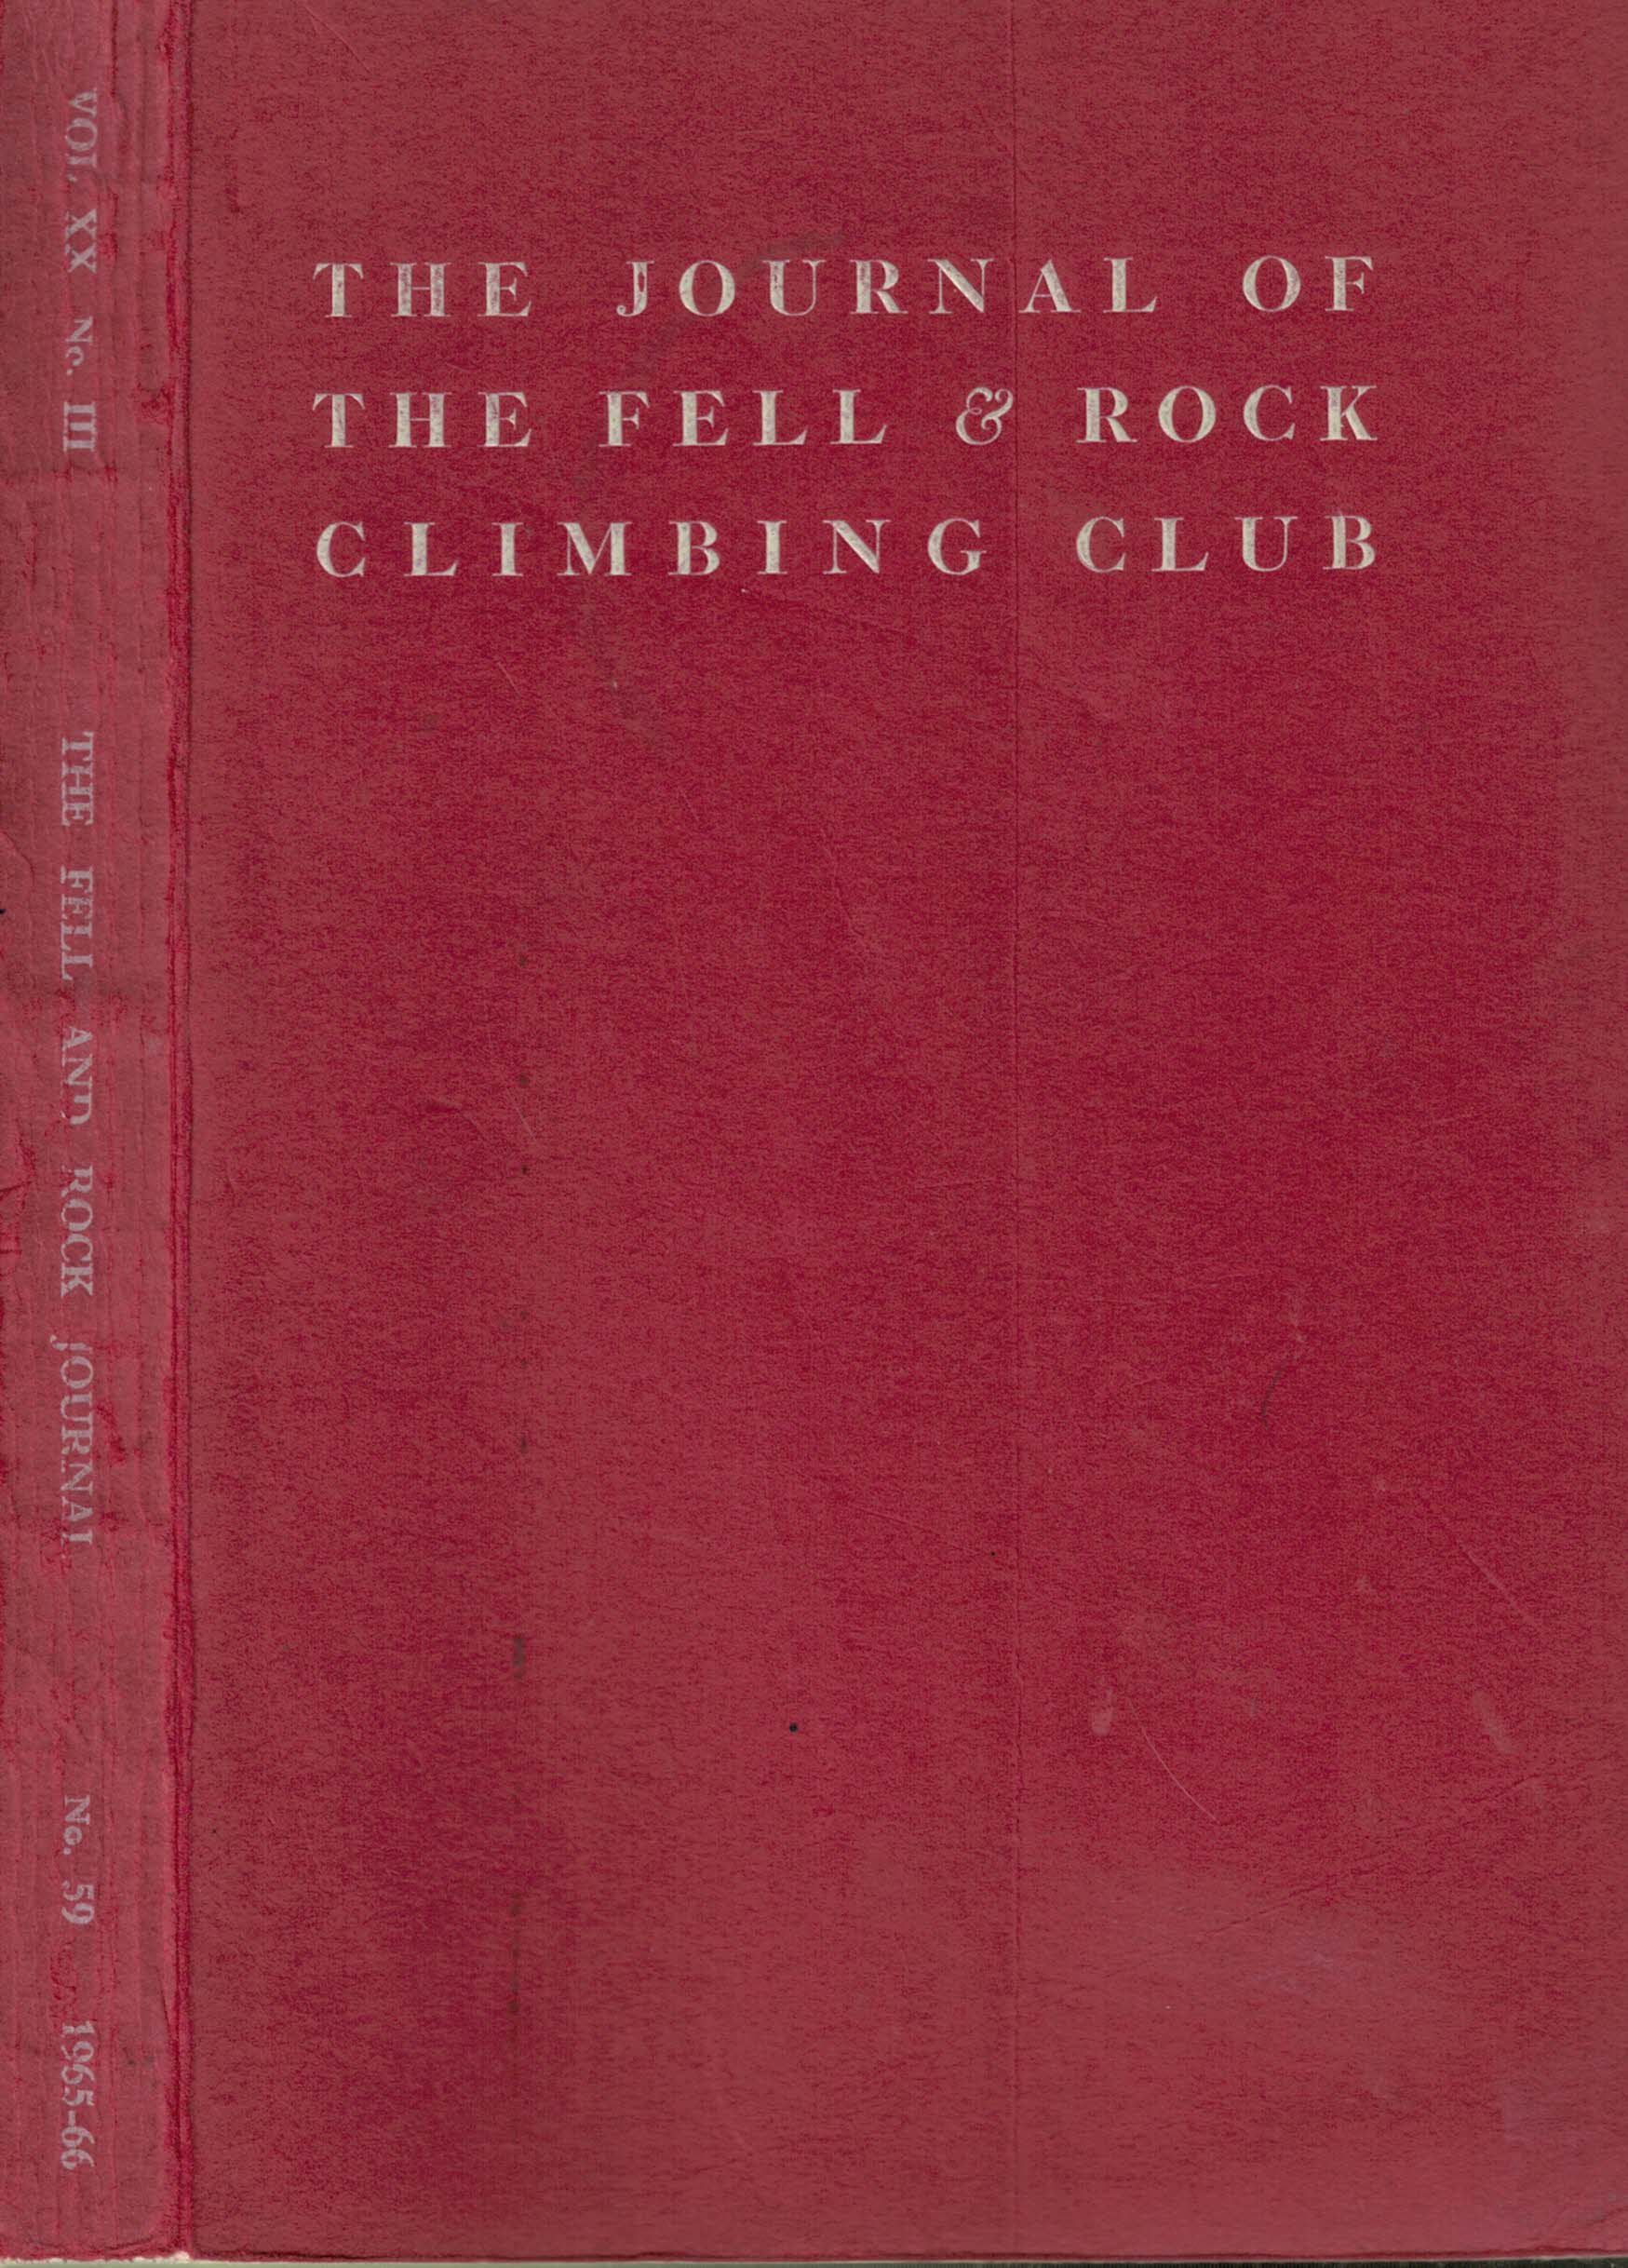 The Journal of the Fell & Rock Climbing Club of the English Lake District. No 59. (Volume 20 No 3) 1966.